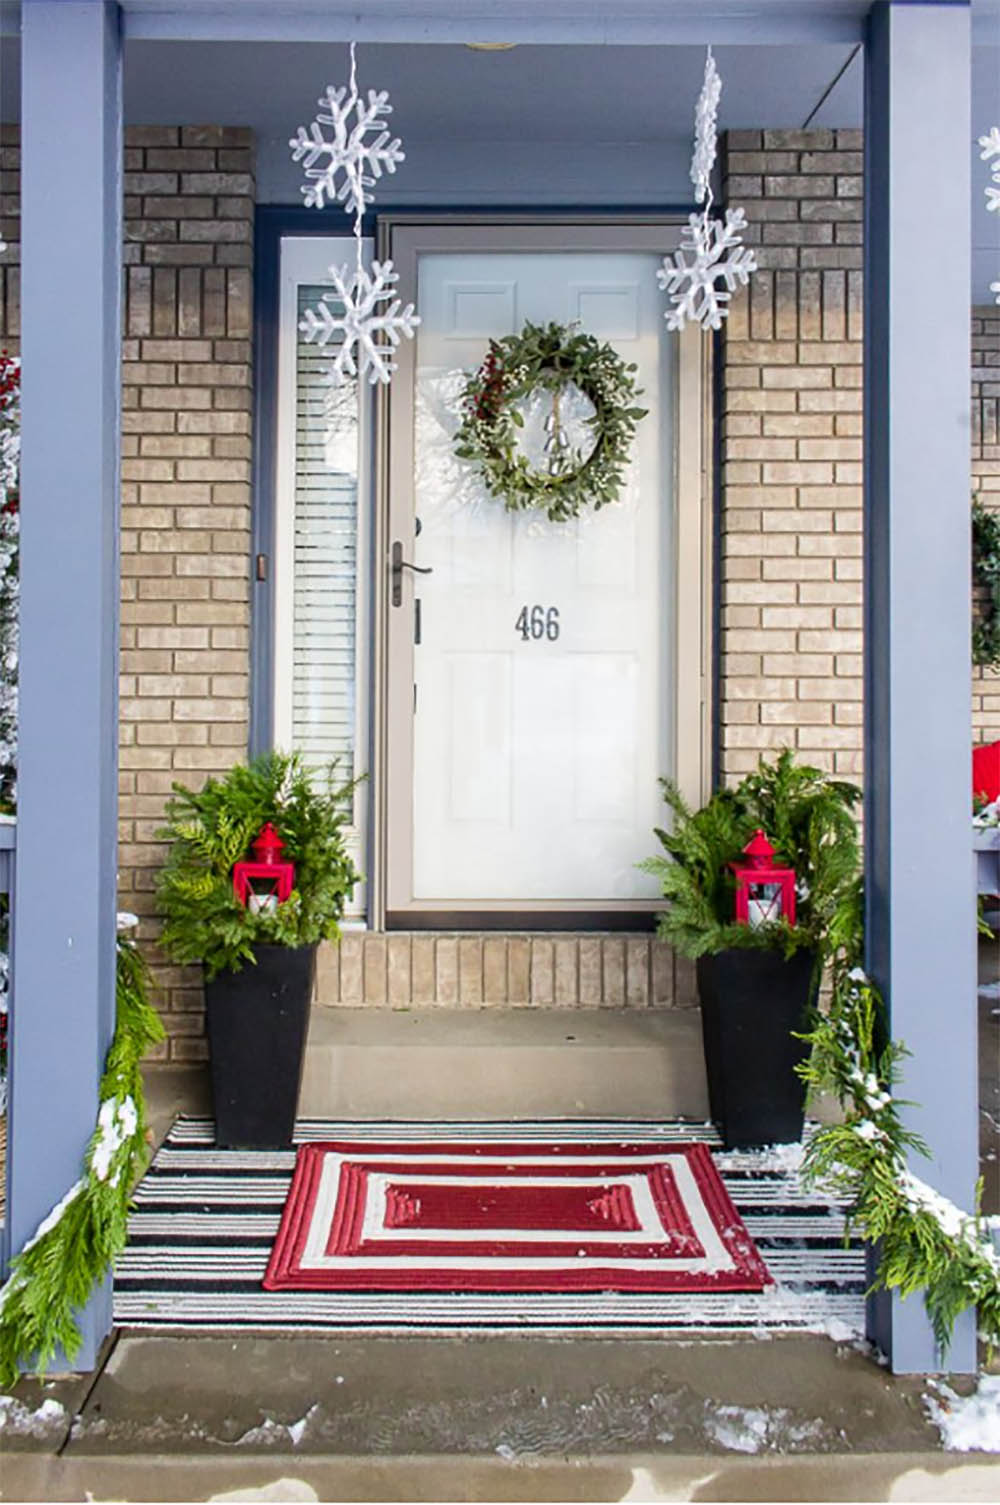 Festive Outdoor Christmas Decorations - The Home Depot